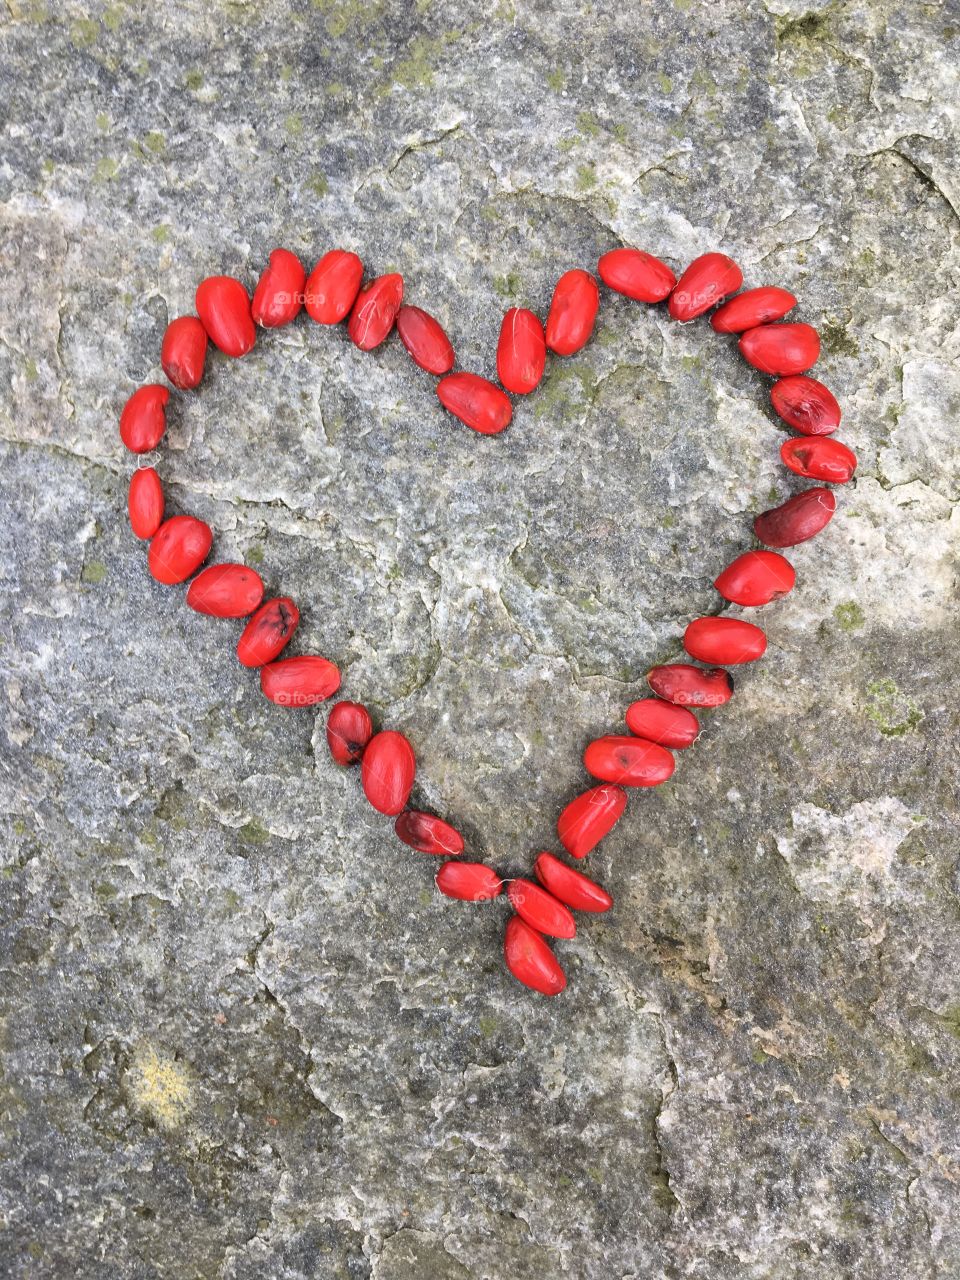 Red heart shaped out of red magnolia seeds on stone